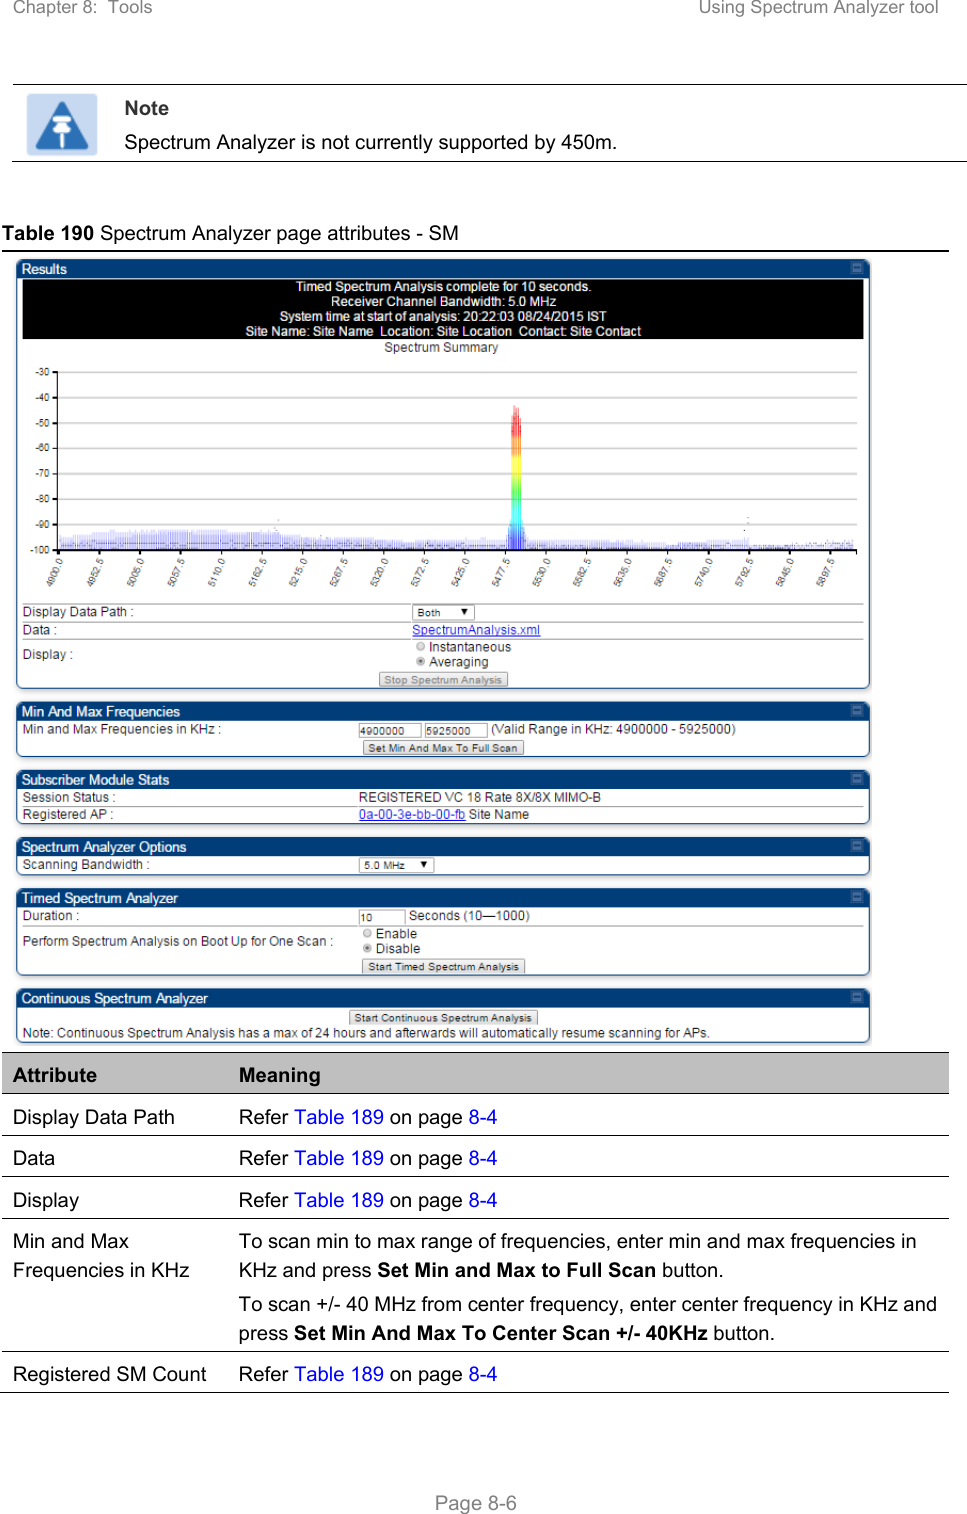 Chapter 8:  Tools  Using Spectrum Analyzer tool   Page 8-6  Note Spectrum Analyzer is not currently supported by 450m.  Table 190 Spectrum Analyzer page attributes - SM  Attribute  Meaning Display Data Path  Refer Table 189 on page 8-4 Data  Refer Table 189 on page 8-4 Display  Refer Table 189 on page 8-4 Min and Max Frequencies in KHz To scan min to max range of frequencies, enter min and max frequencies in KHz and press Set Min and Max to Full Scan button. To scan +/- 40 MHz from center frequency, enter center frequency in KHz and press Set Min And Max To Center Scan +/- 40KHz button. Registered SM Count  Refer Table 189 on page 8-4 